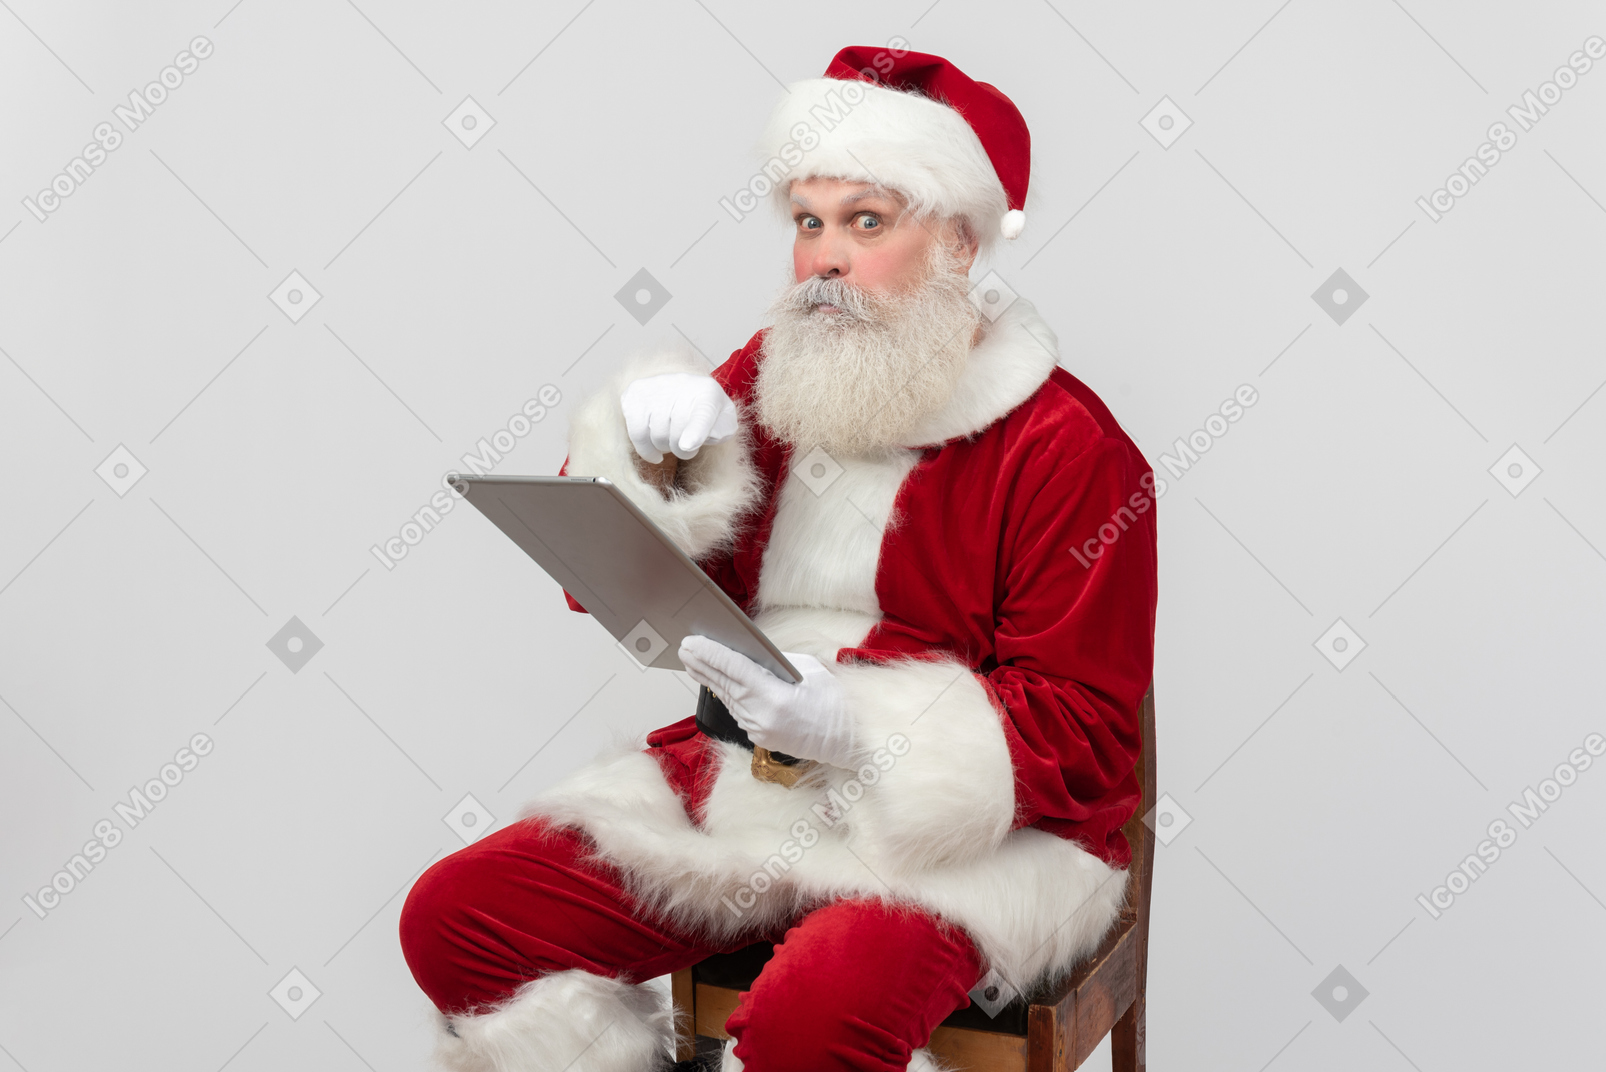 Santa claus pointing at folder and looks lost